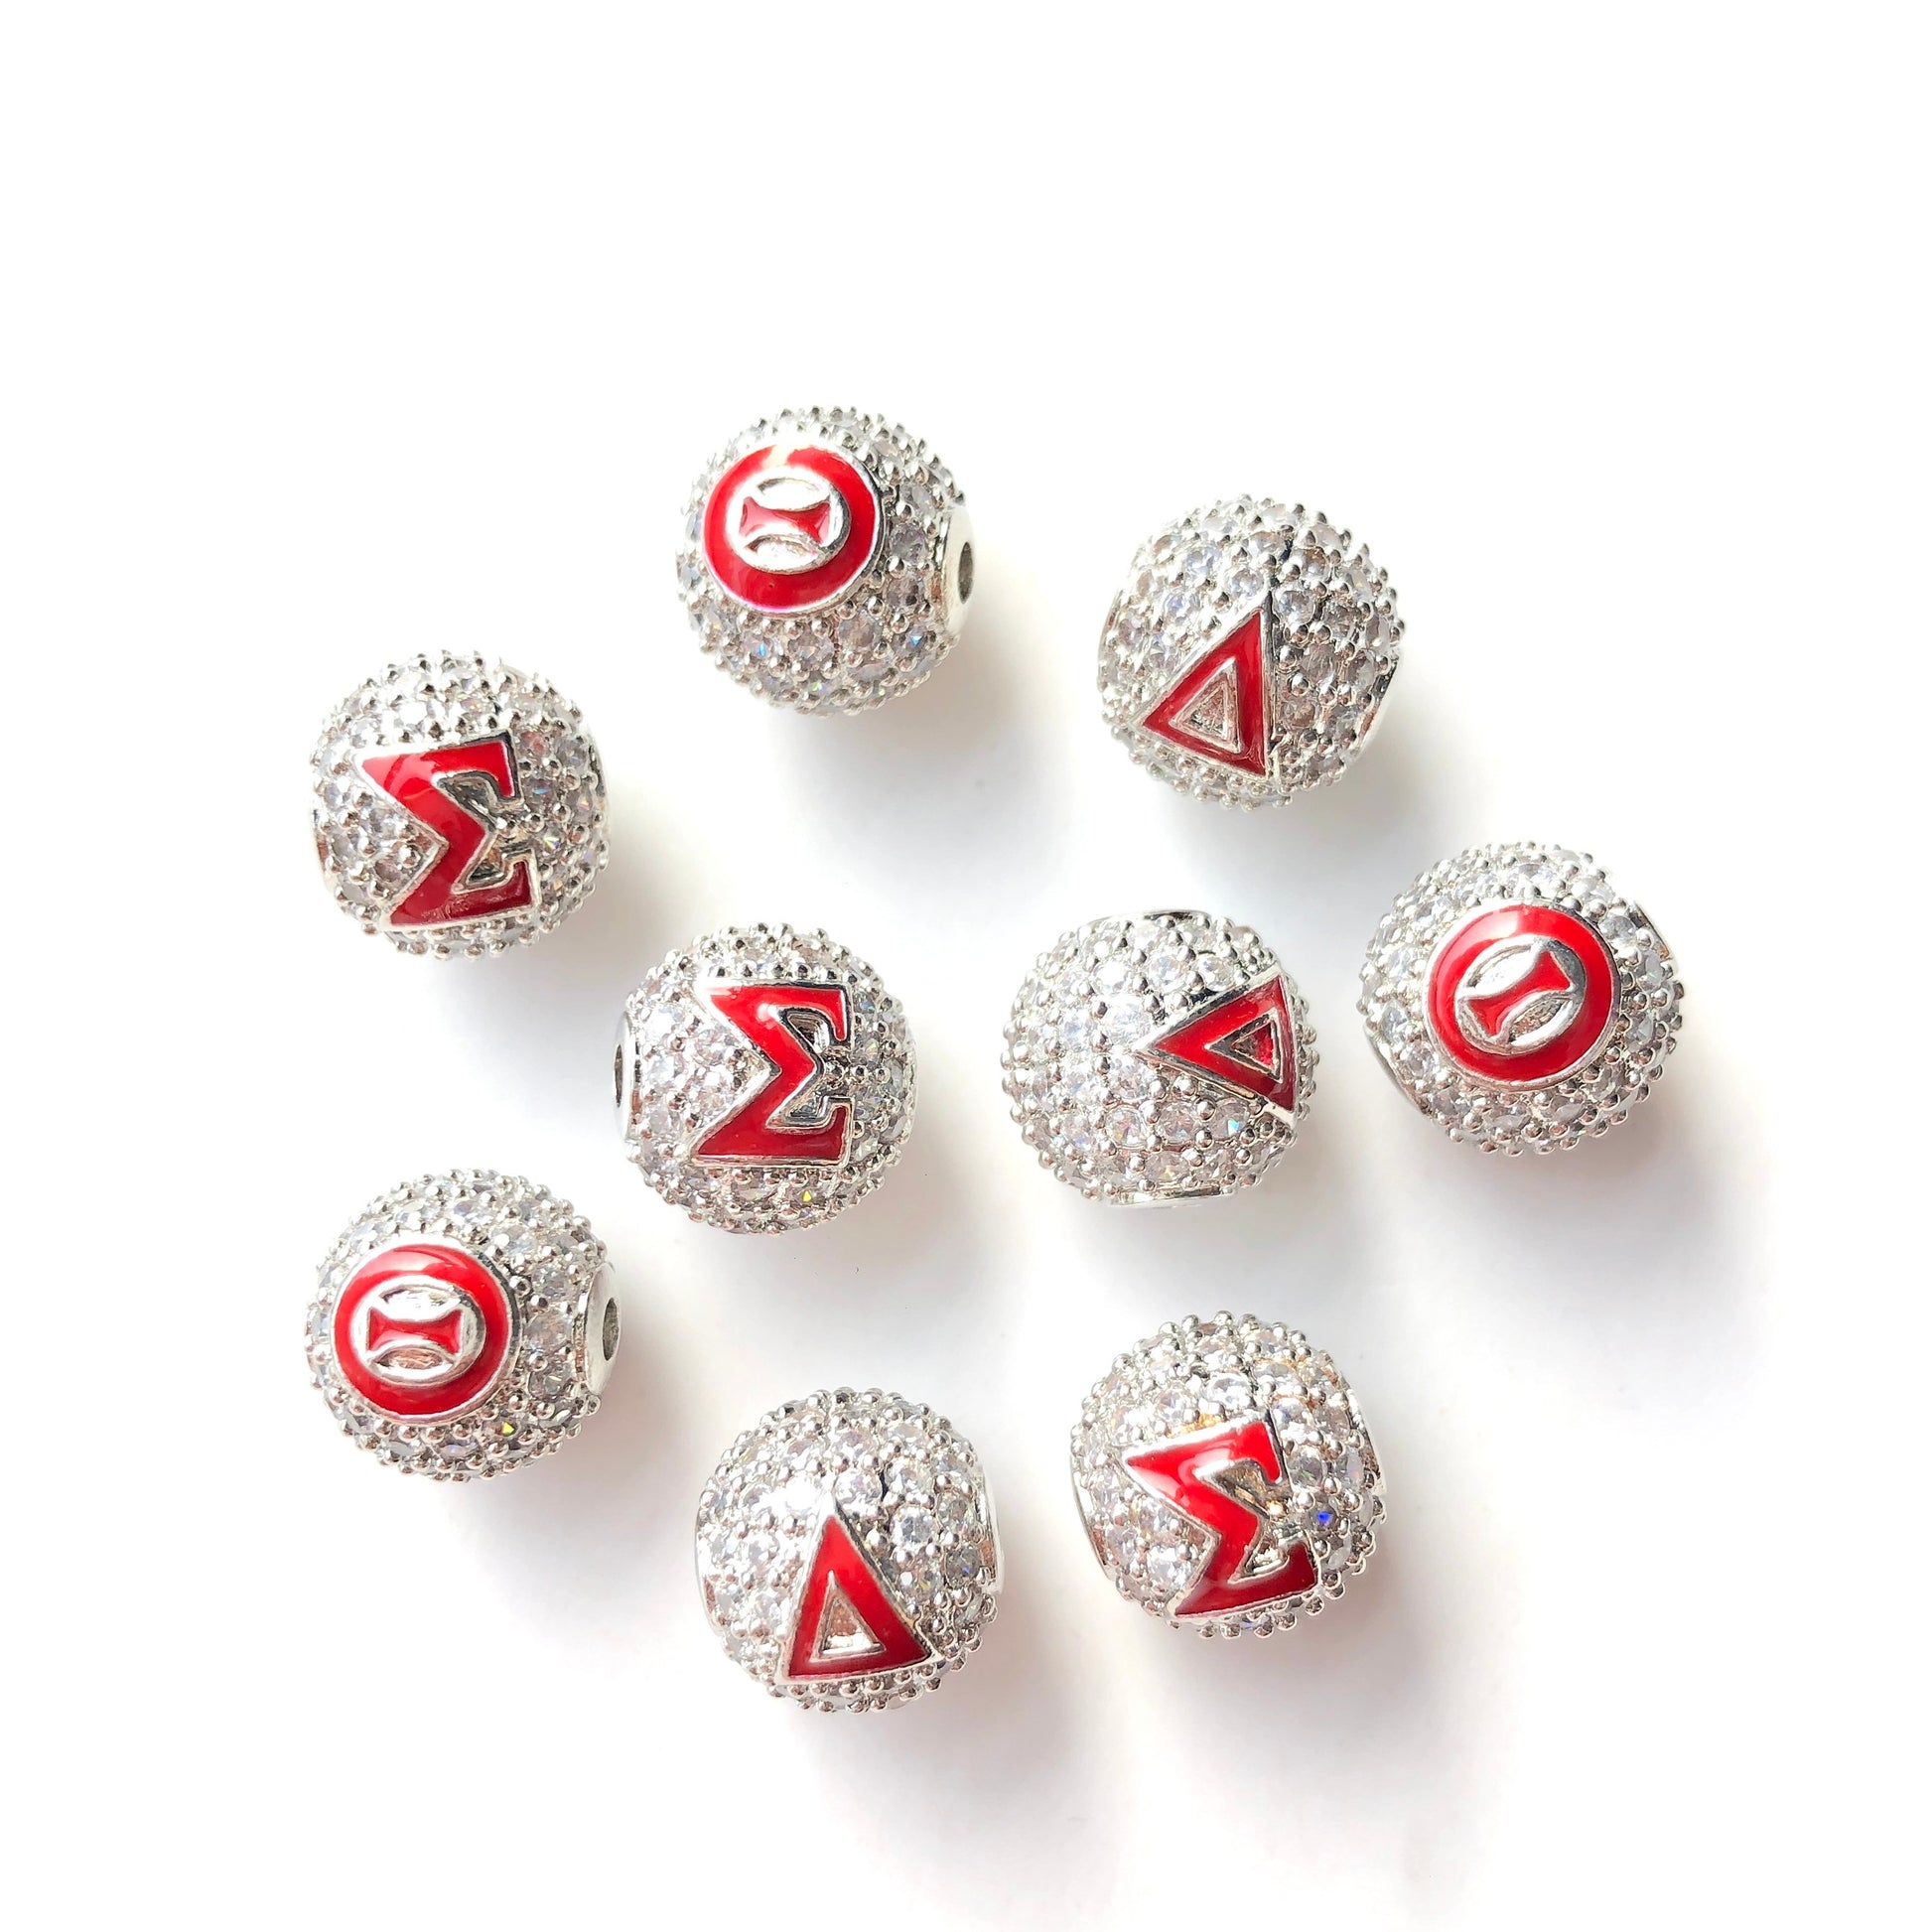 12pcs/lot 10mm Red Enamel CZ Paved Greek Letter "Δ", "Σ", "Θ" Ball Spacers Beads Mix Silver Letters 4 Letters Each CZ Paved Spacers 10mm Beads Ball Beads Greek Letters New Spacers Arrivals Charms Beads Beyond